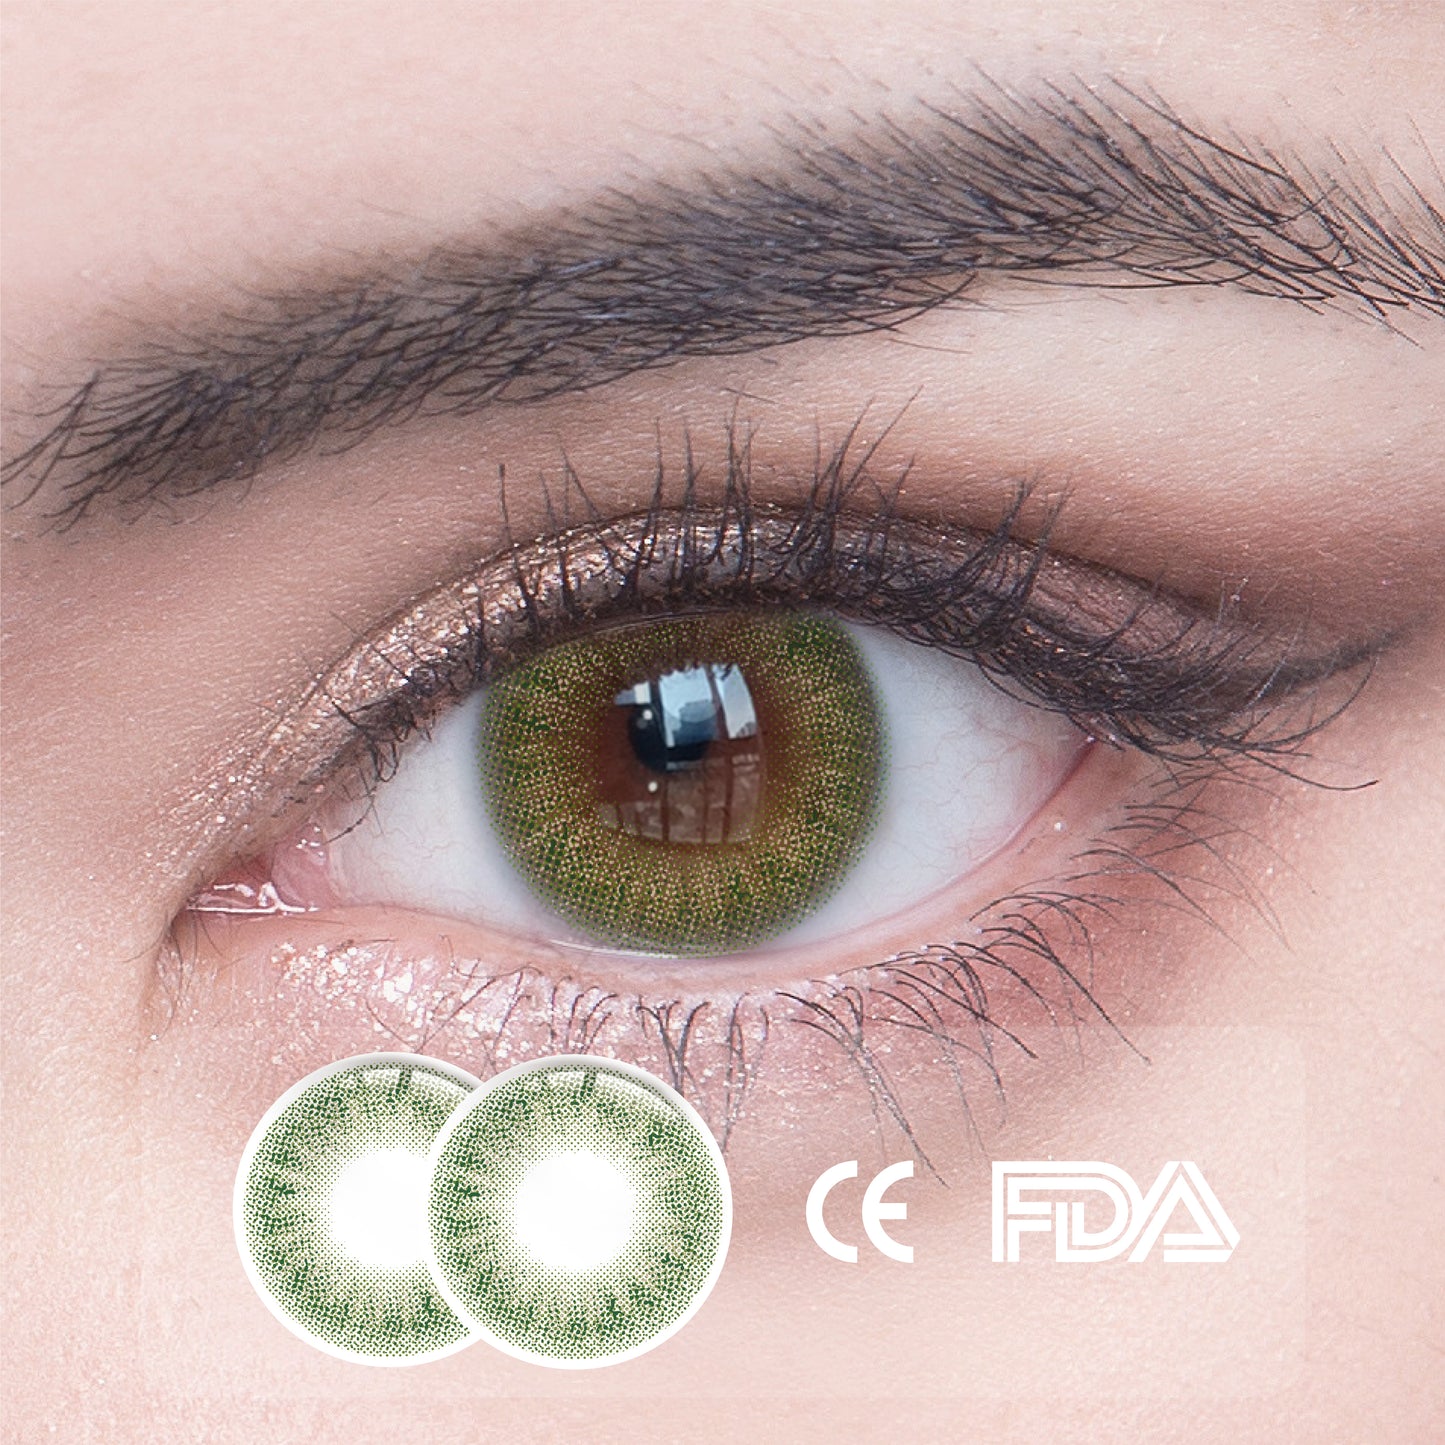 1Pcs FDA Certificate Eyes Colorful Contact Lenses - Nile green